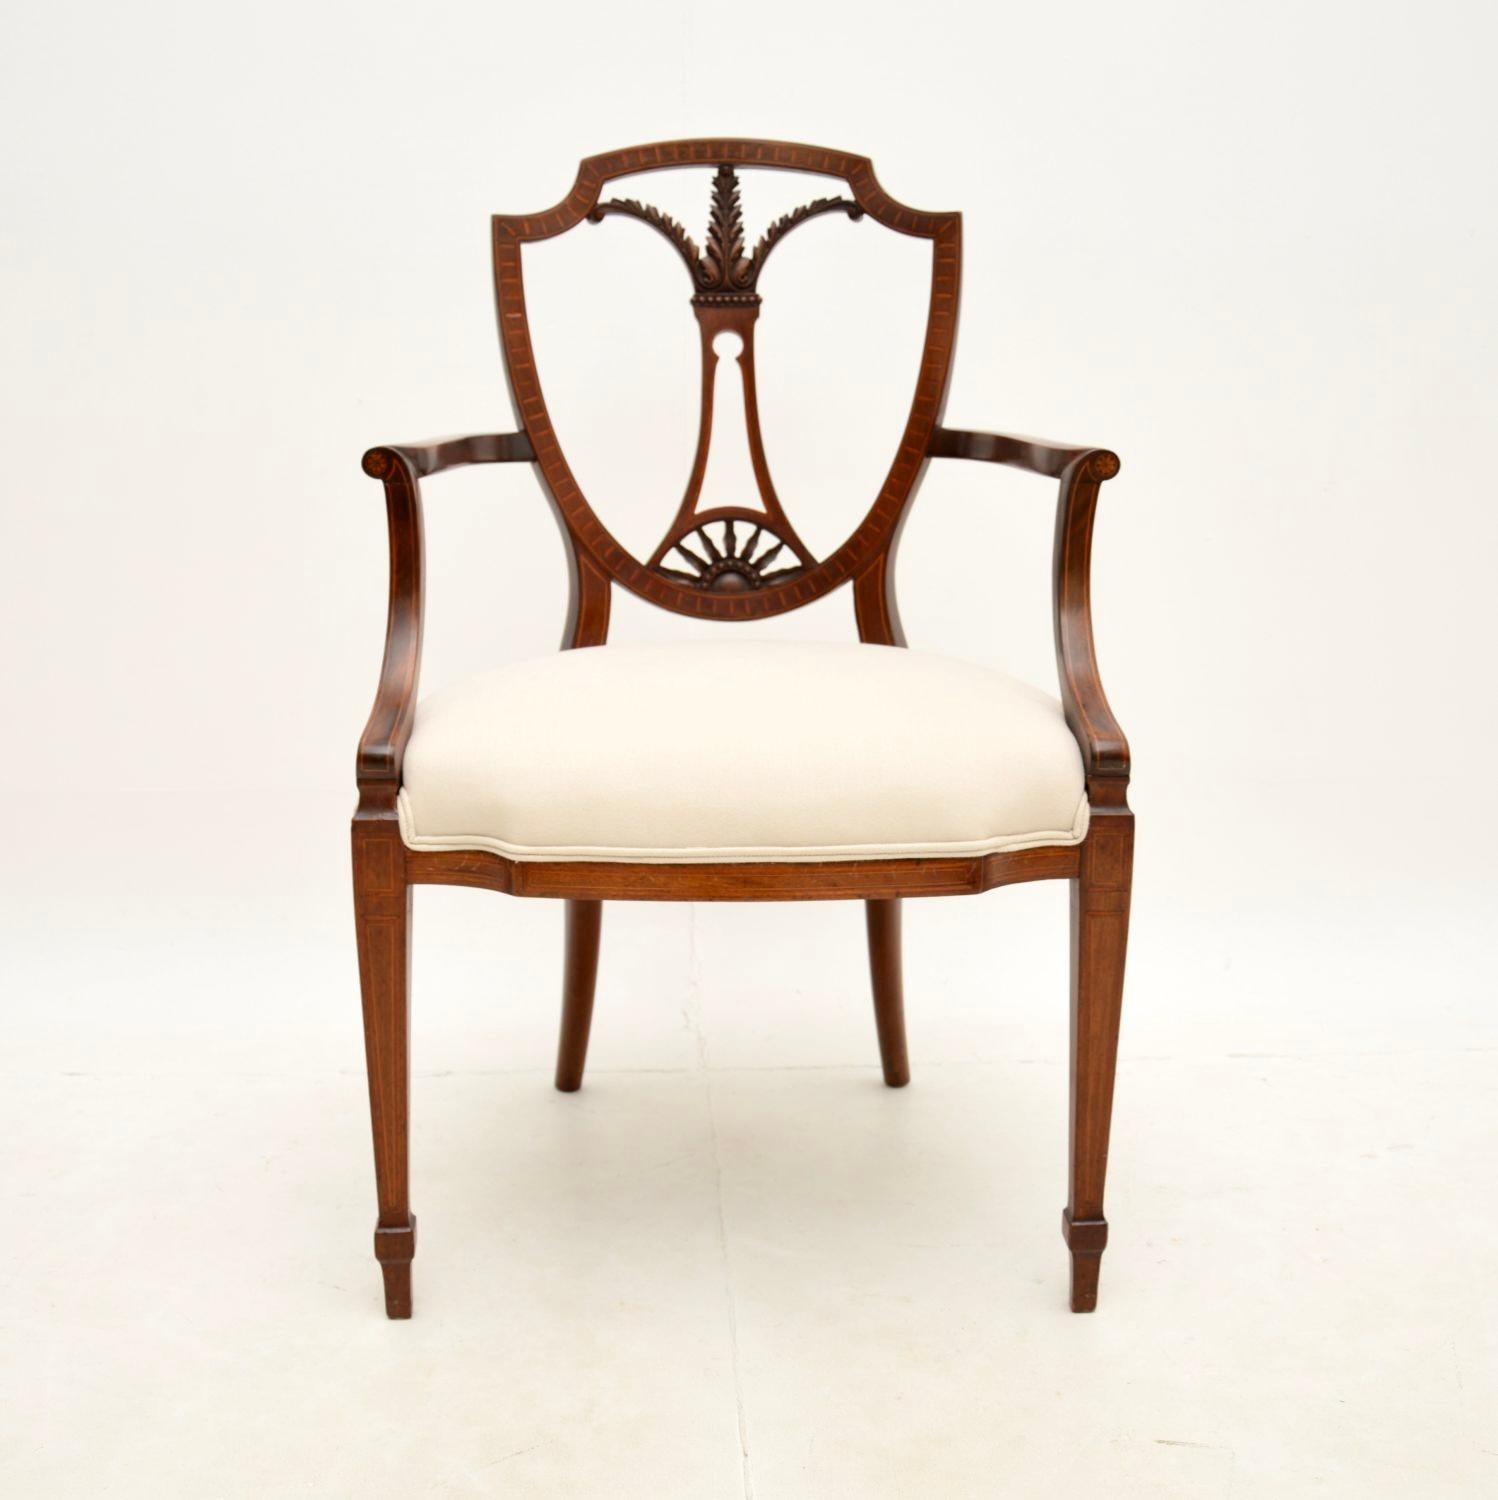 A stunning antique carver armchair. This was made in England, it is in the Sheraton style and dates from around the 1900-1910 period.

The quality is outstanding, the frame has a gorgeous, elegant design. The pierced back has intricate carving, the